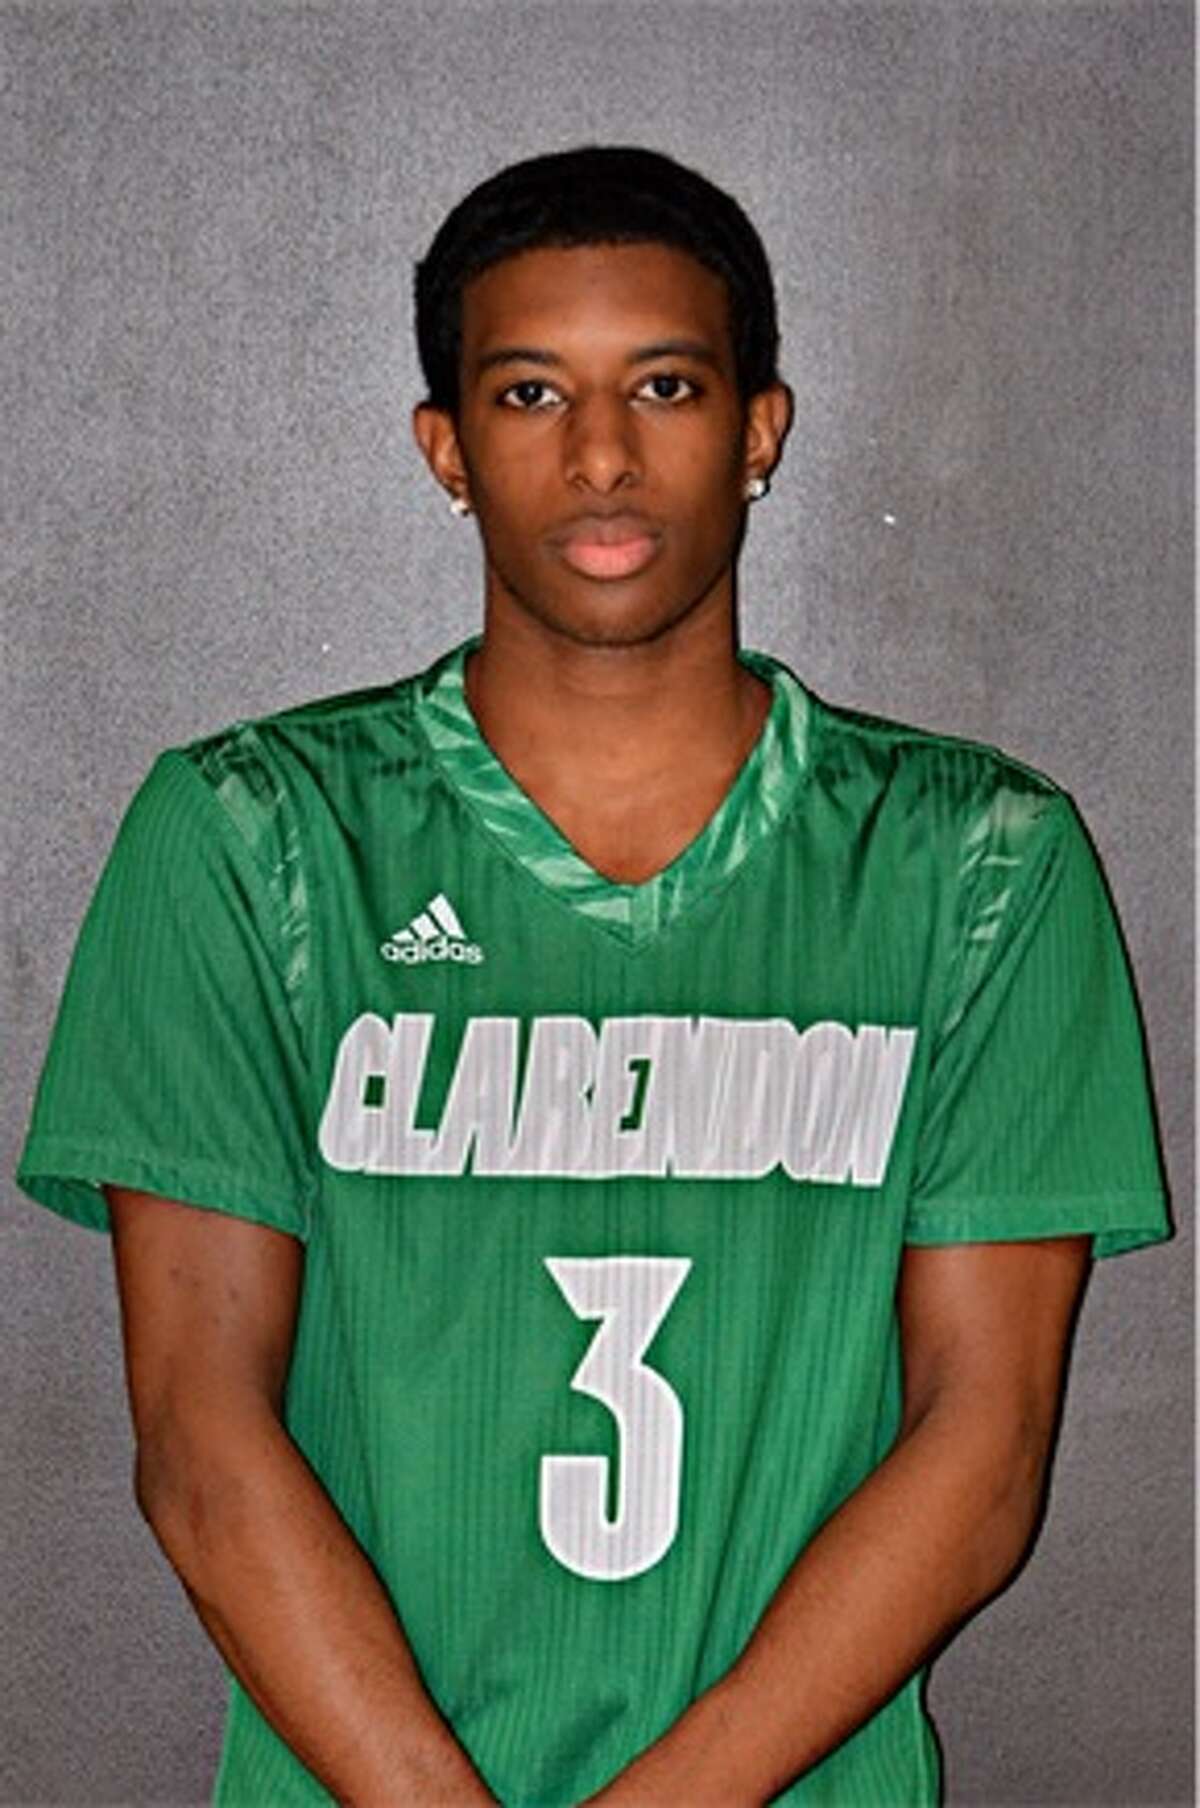 Reece Brooks, a 5-foot-9 shooting guard from Clarendon, a junior college in Clarendon, Texas, is expected to play at the University at Albany for the 2018-19 season. (Photo courtesy Clarendon College)